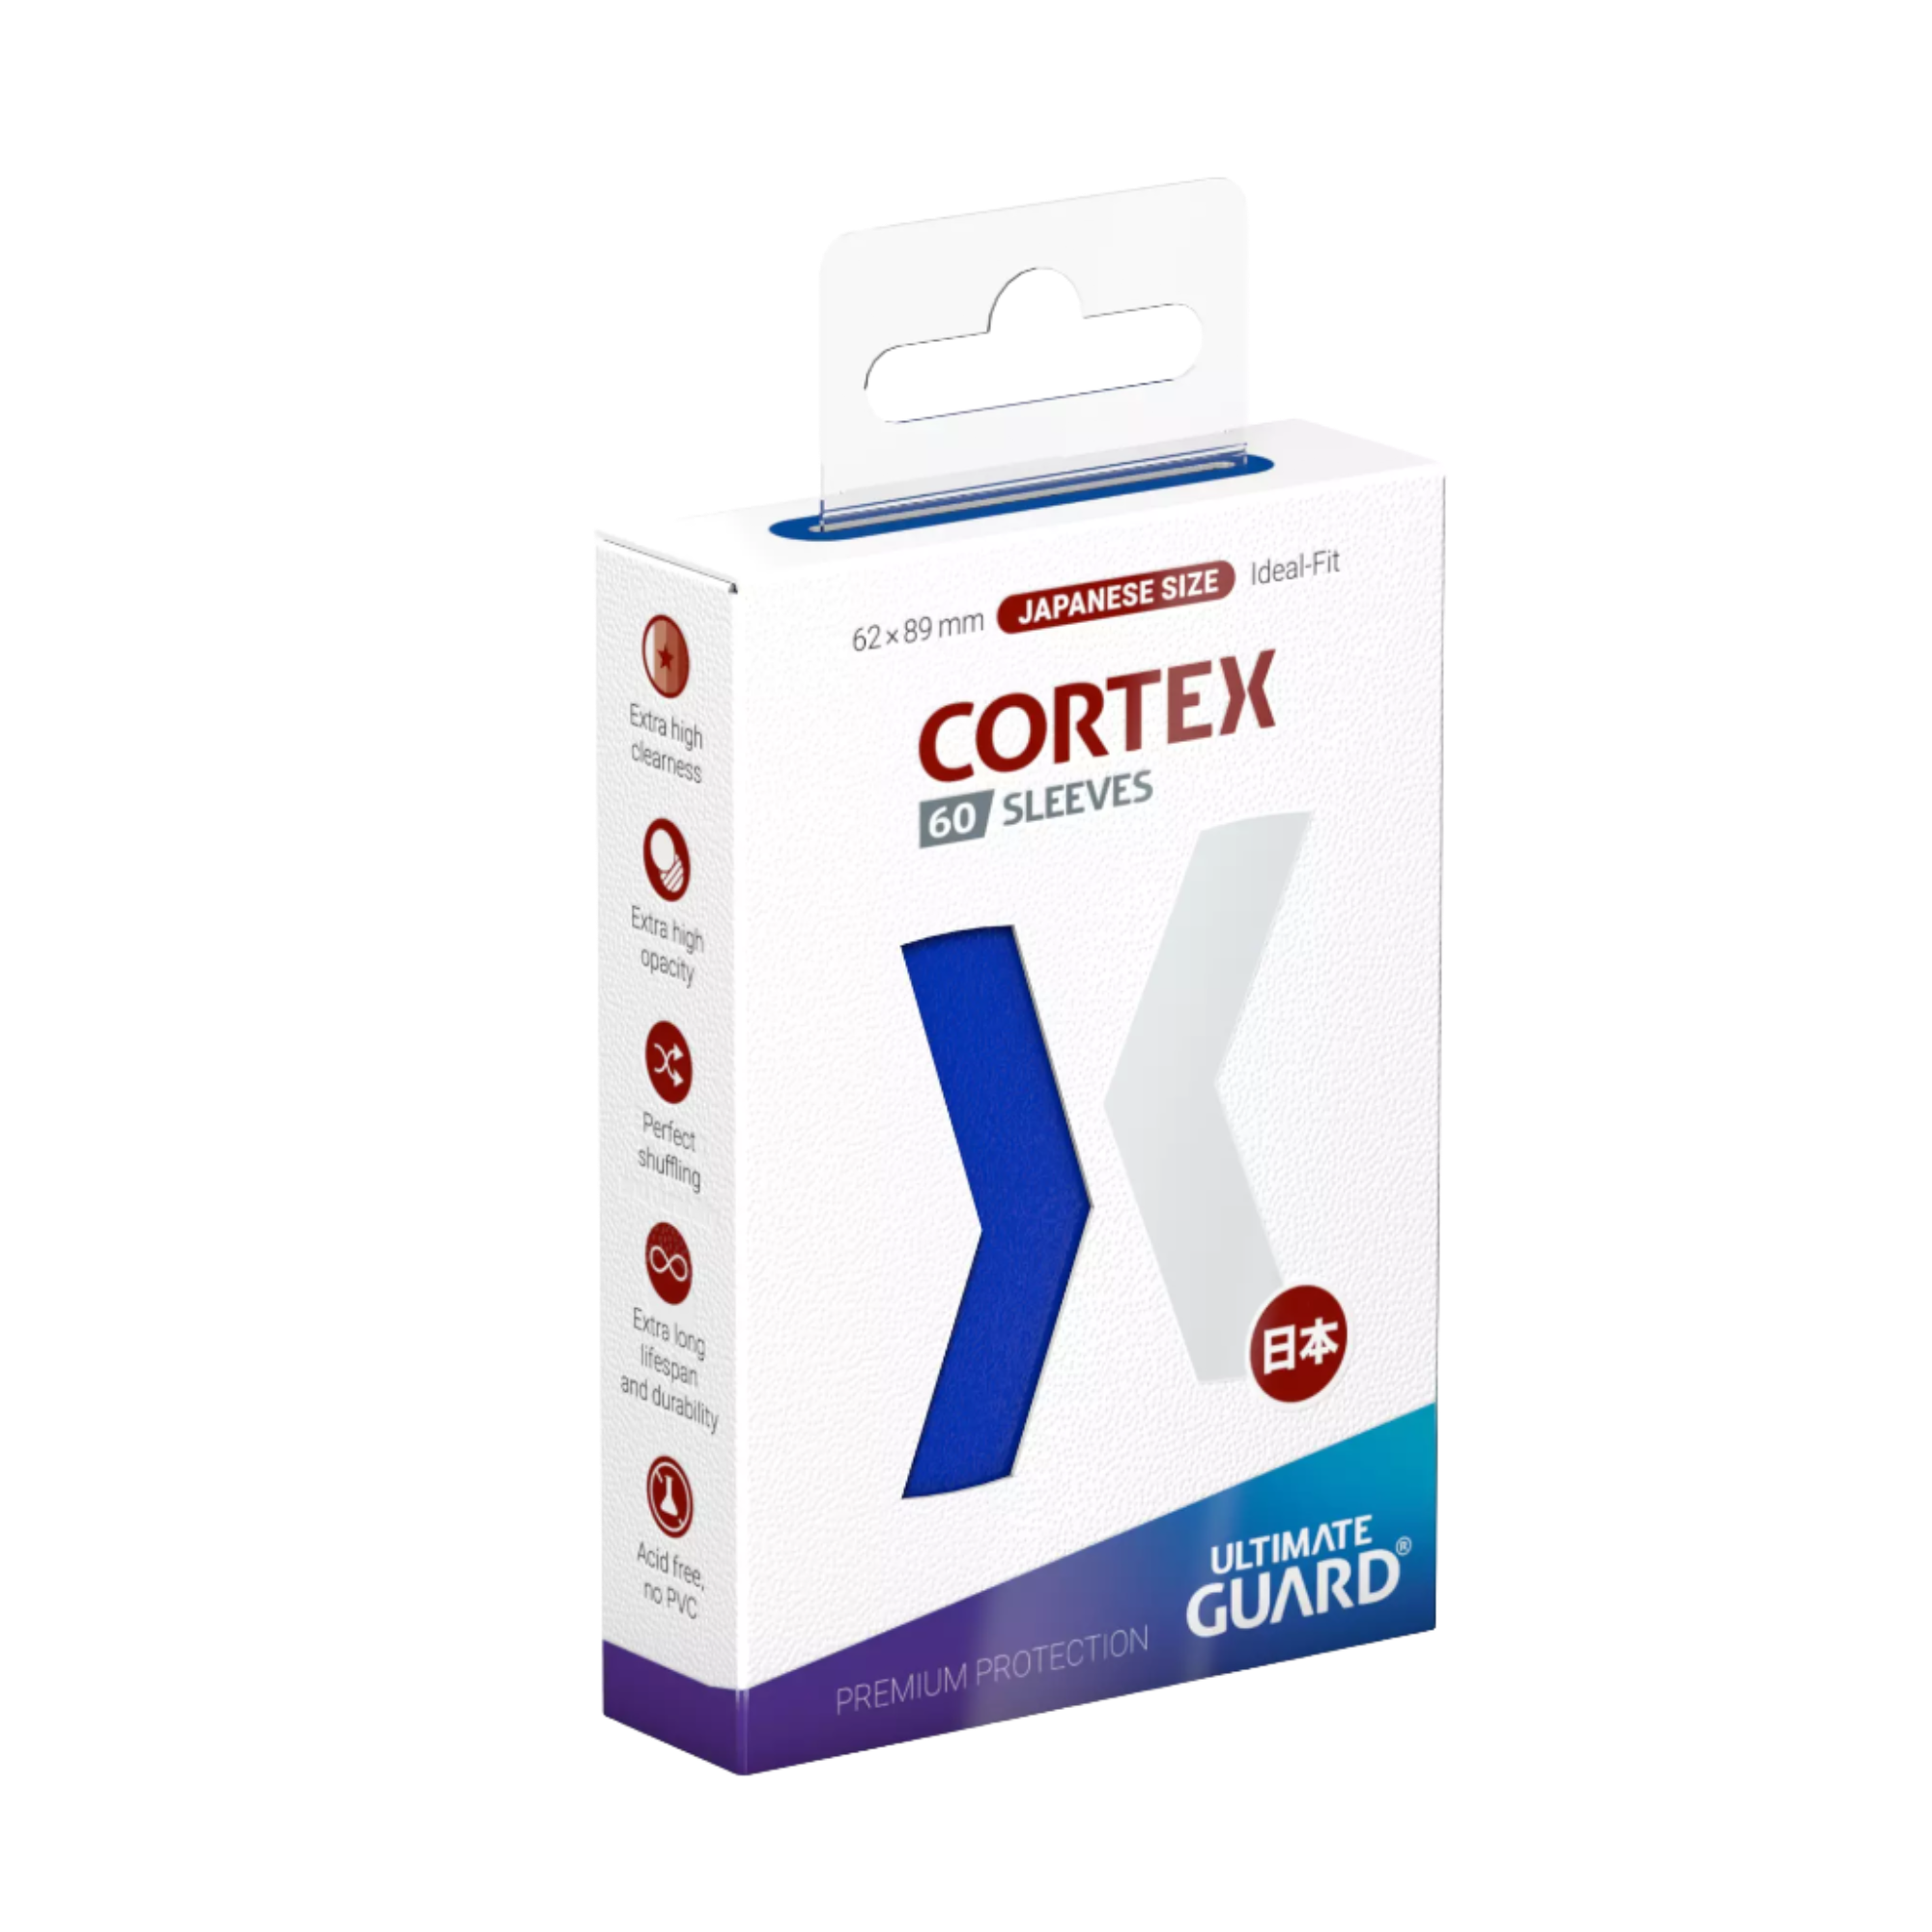 Ultimate Guard - Cortex Sleeves - Japanese Size - Ideal-Fit - Blue - 60pk